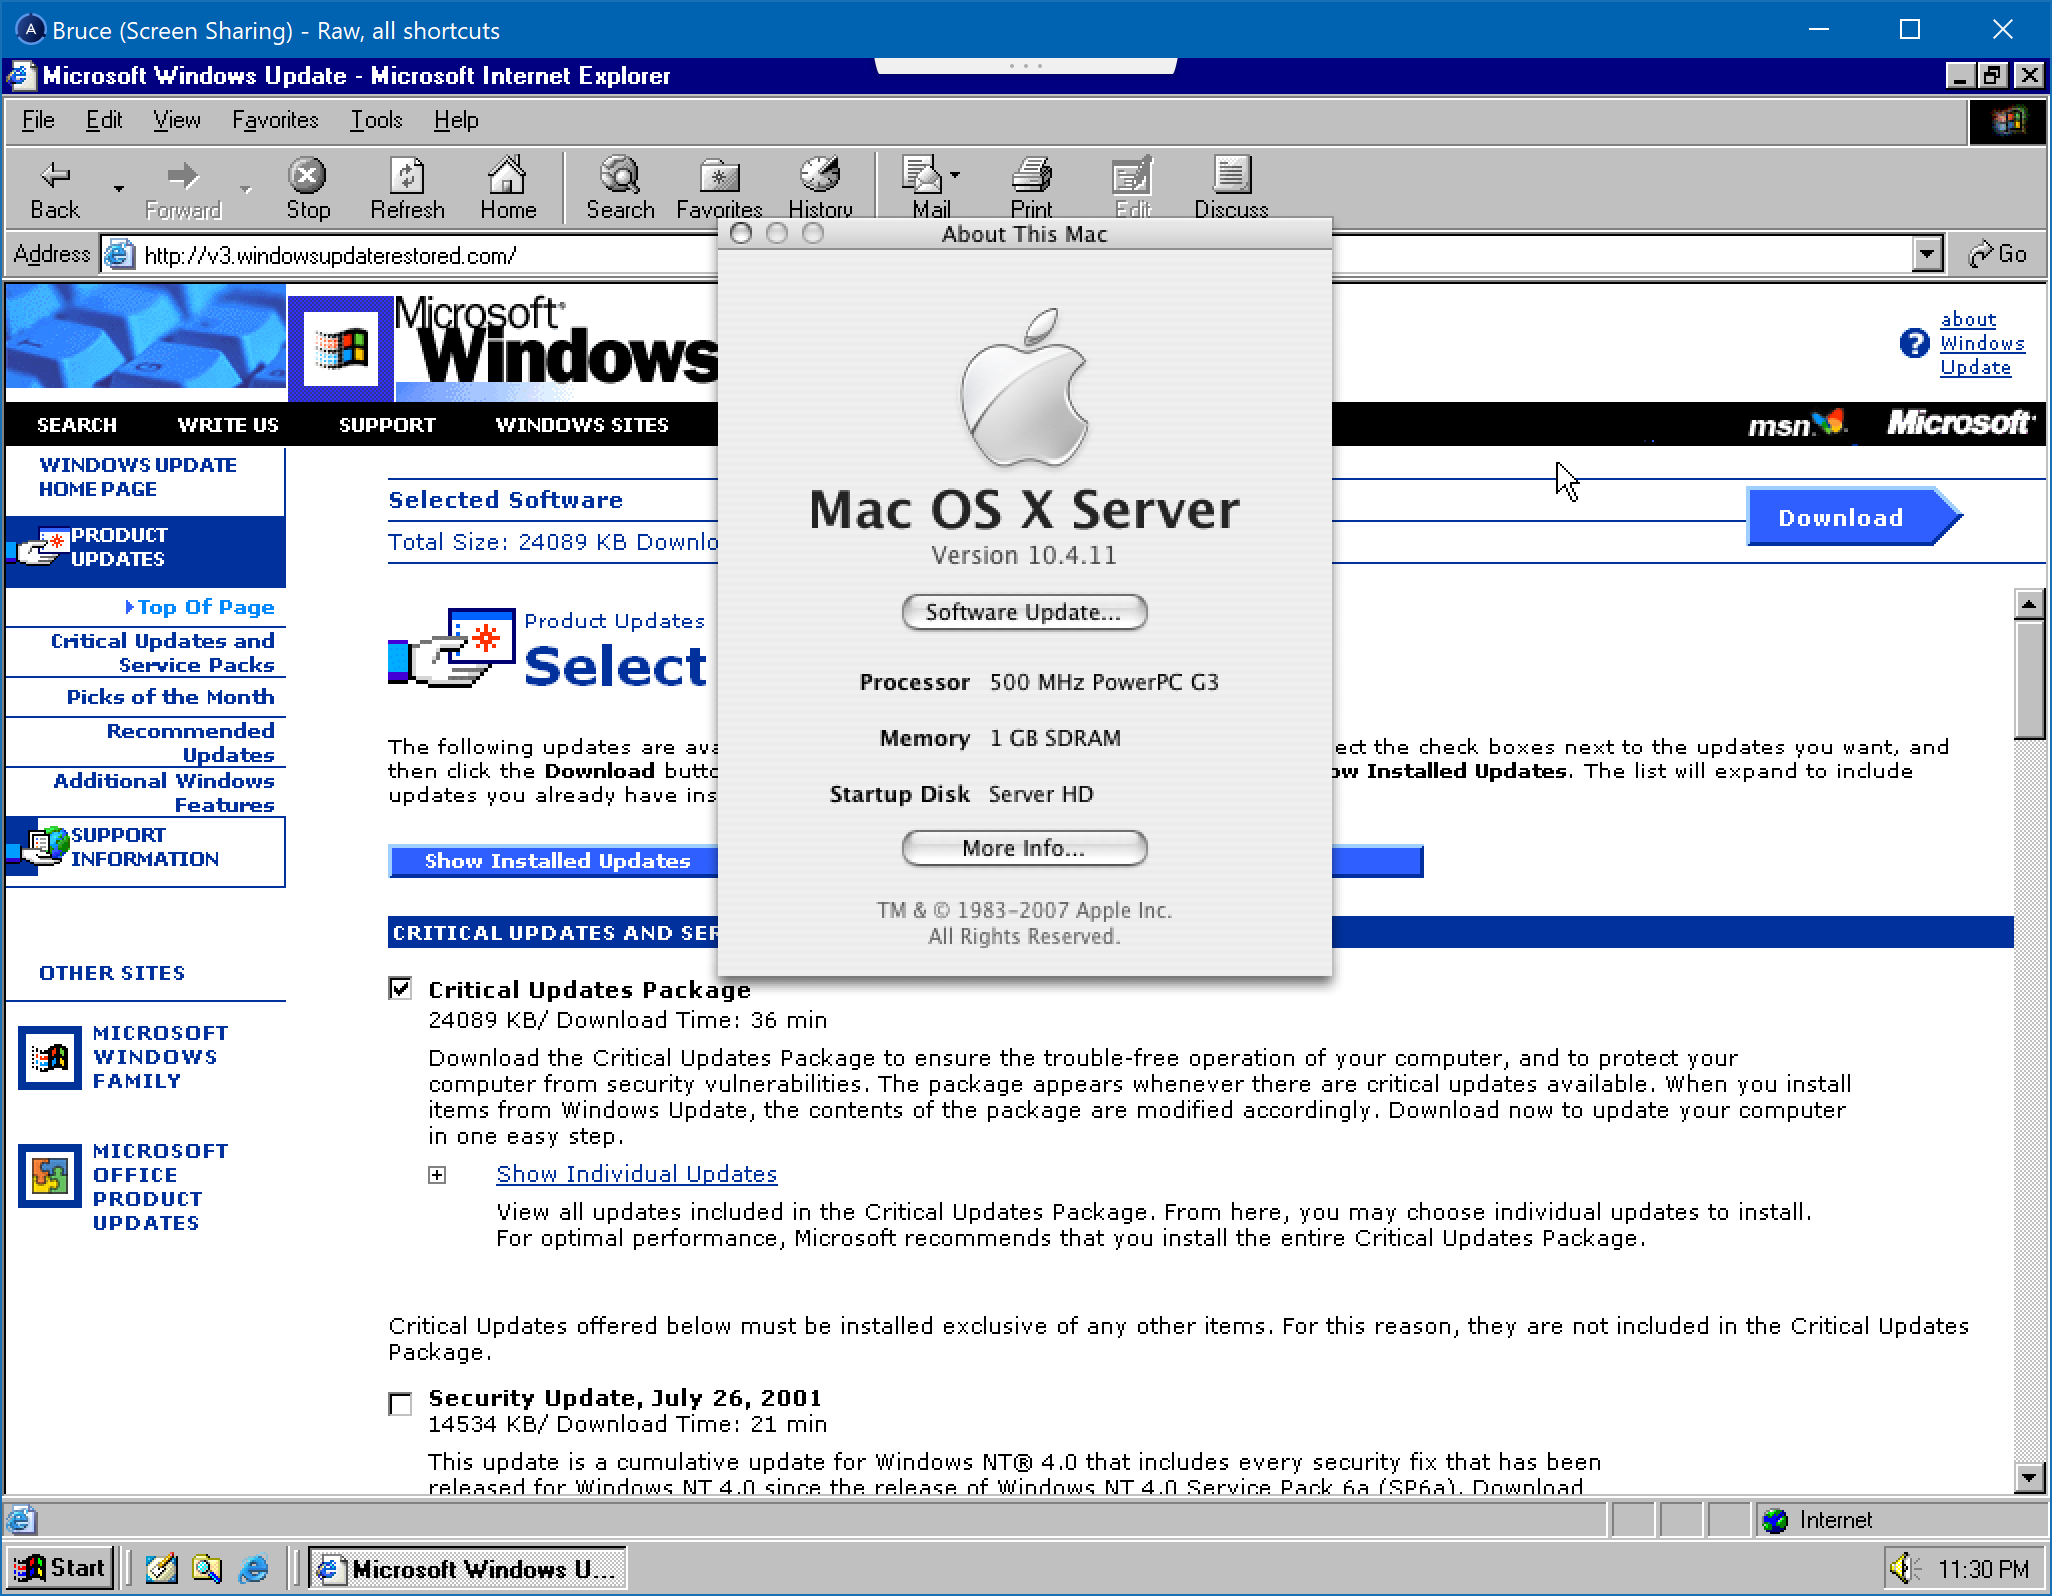 Windows Update Reloaded on Windows NT 4.0, hosted as a Virtual PC VM on Mac OS X Server 10.4.11 on an iMac G3. The Mac is being used through Remotix on a Windows 10 PC.